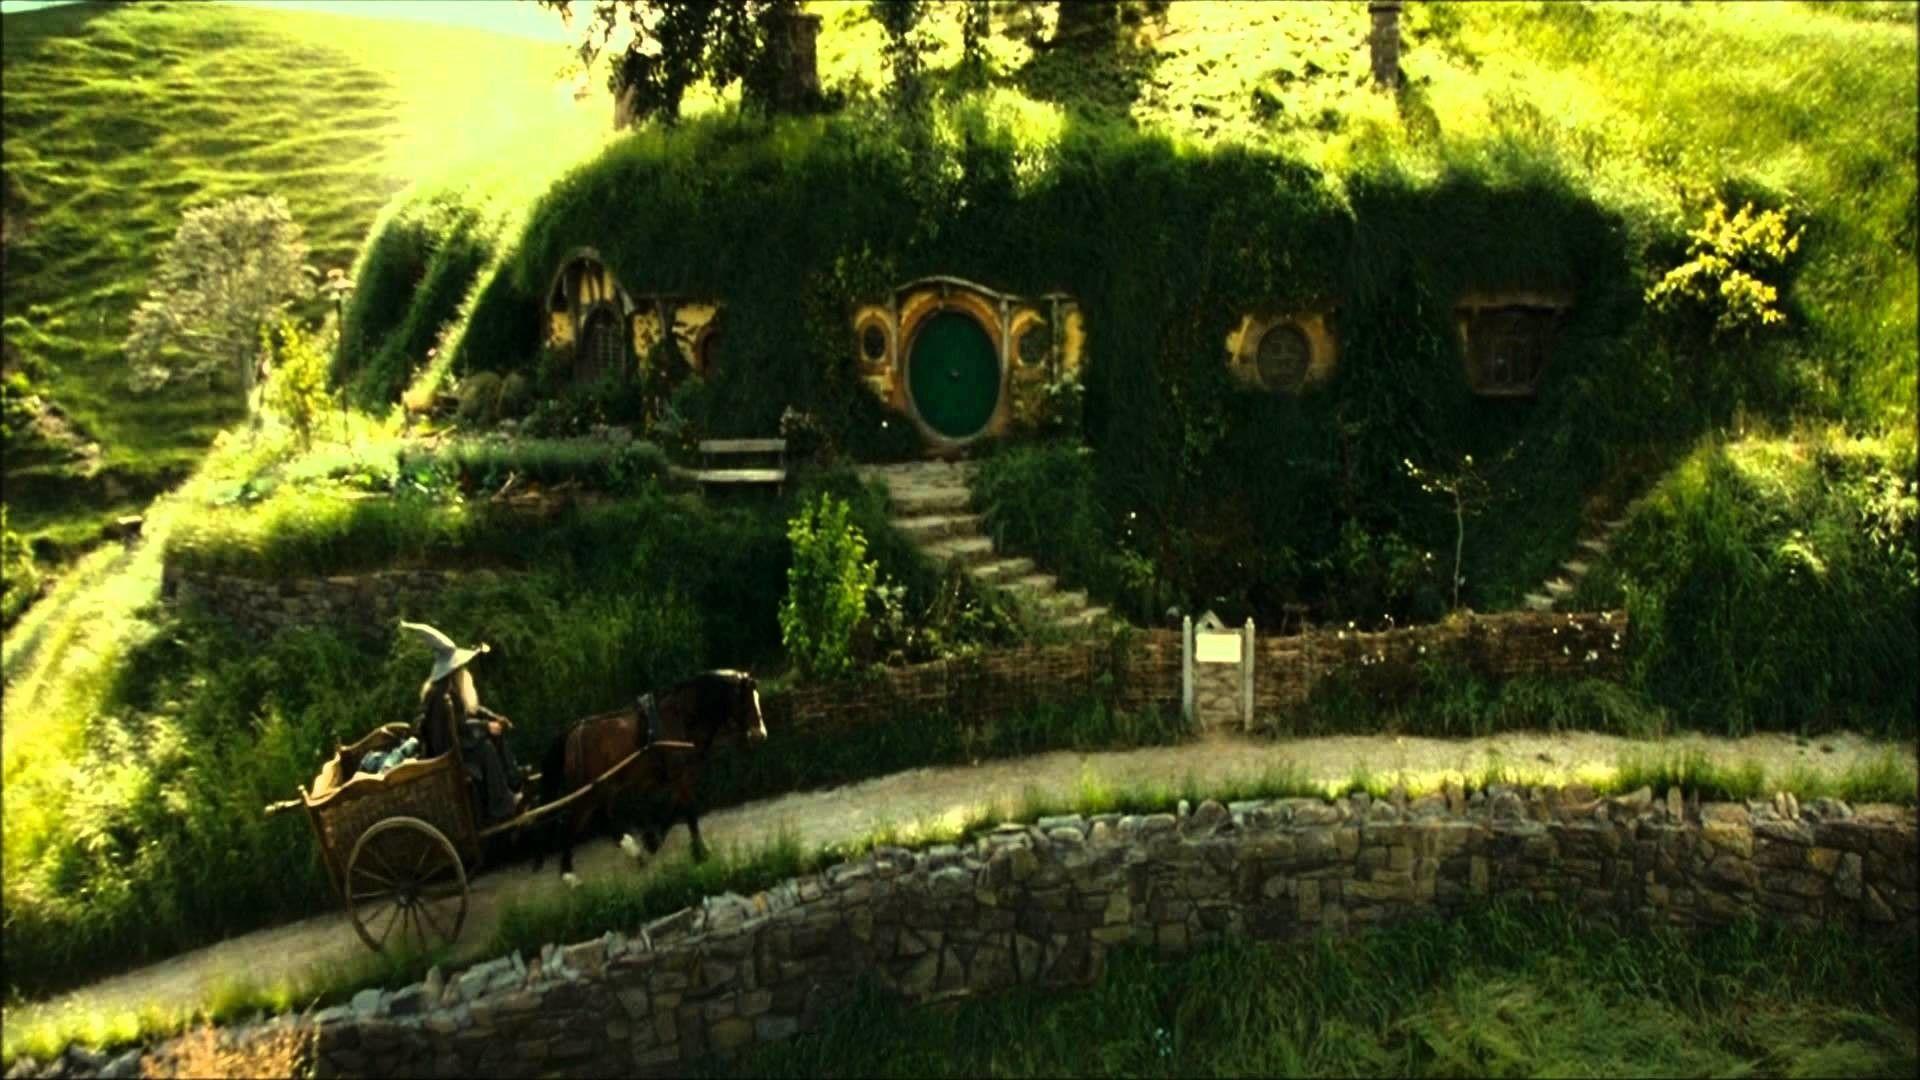 Wallpaper The Lord of The Rings The Shire The Hobbit Pippin Took  Atmosphere Background  Download Free Image